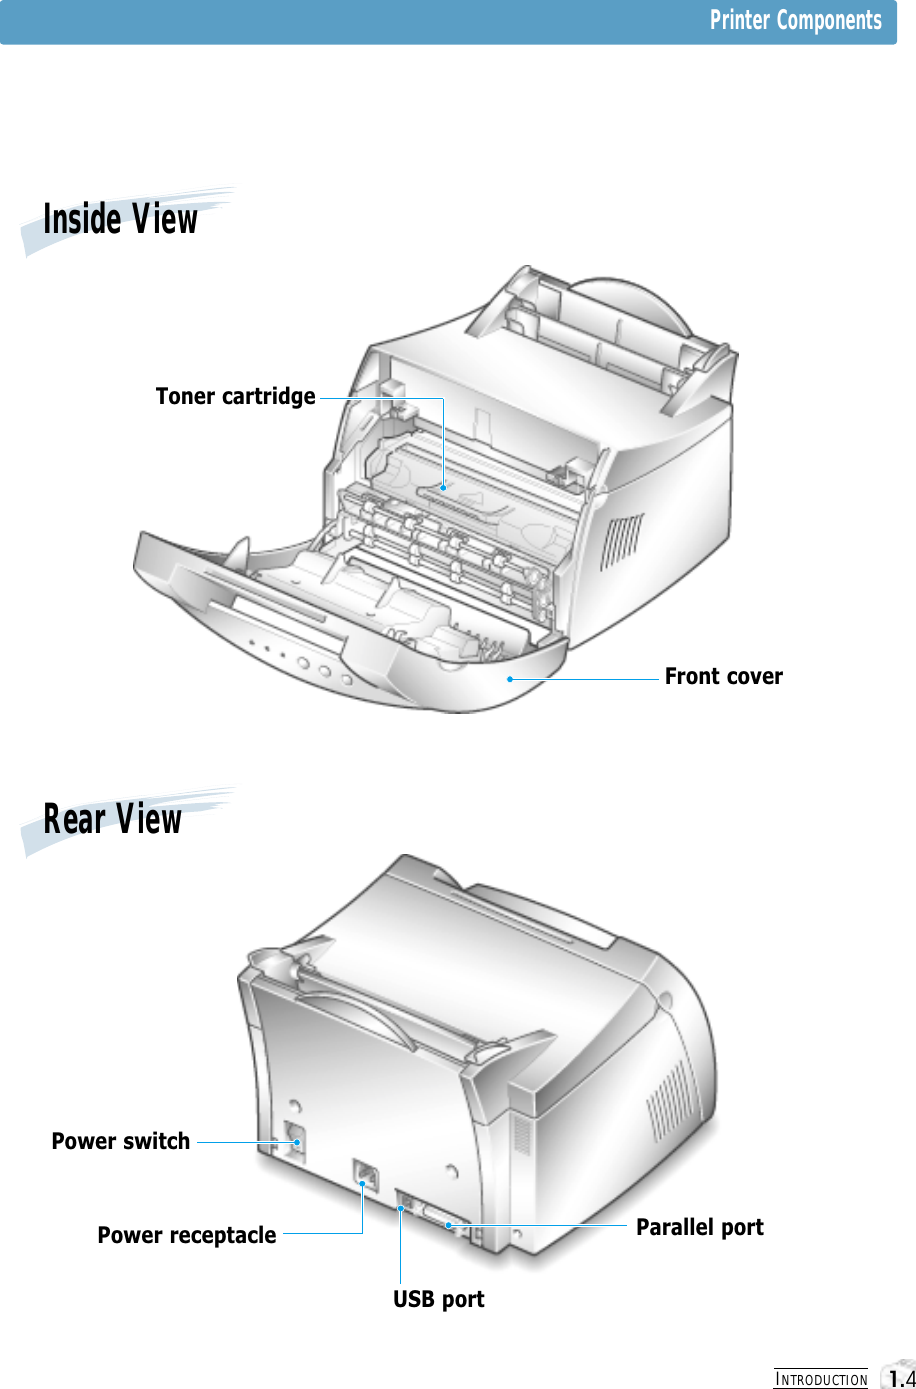 INTRODUCTION1.4Inside ViewRear ViewPower switchPower receptacle Parallel portUSB portToner cartridgePrinter ComponentsFront cover